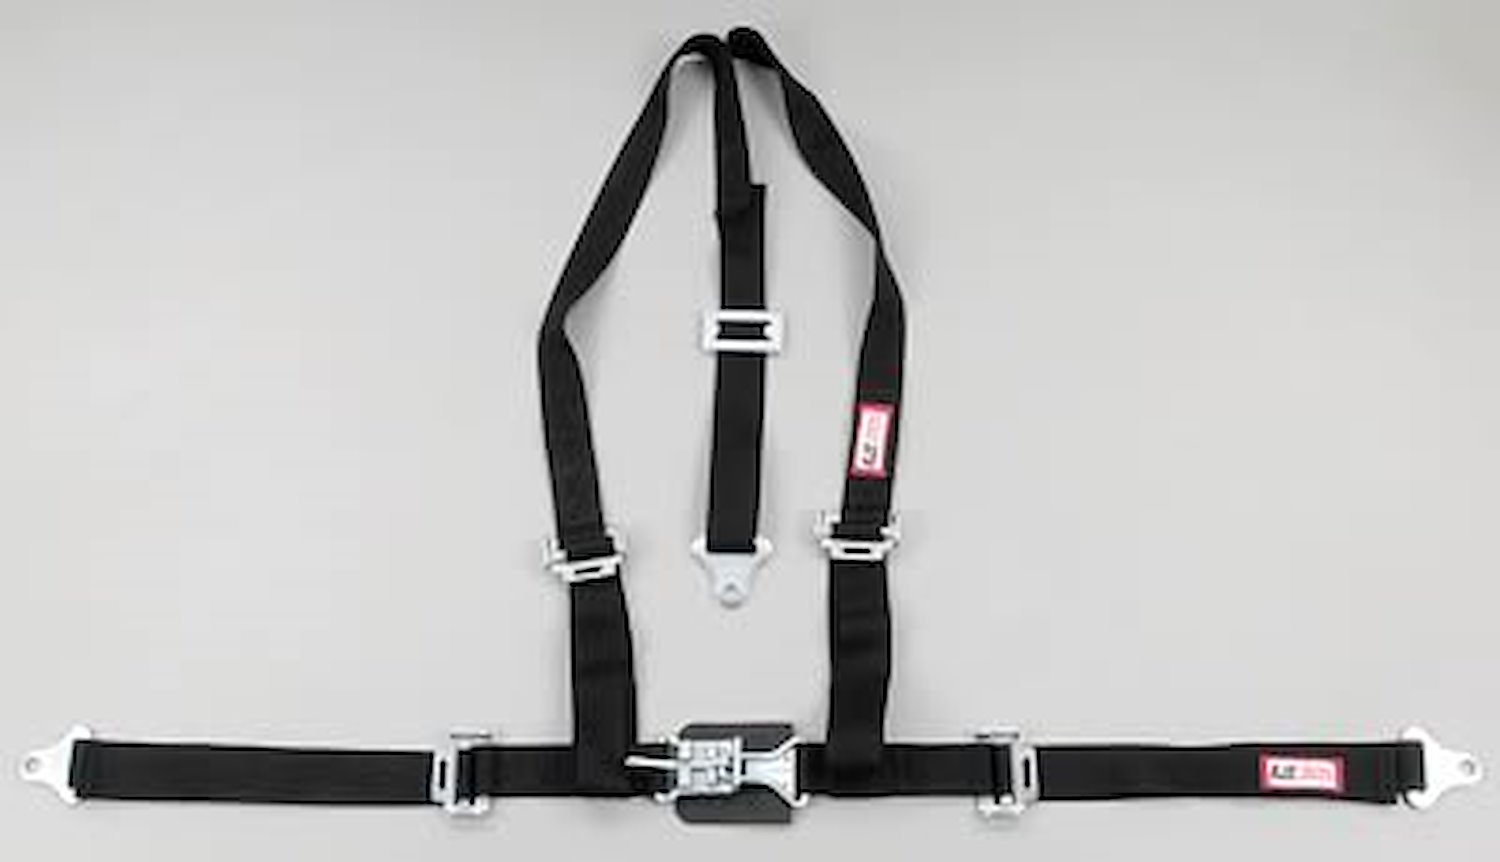 NON-SFI L&L HARNESS 2 PULL UP Lap Belt BOLT SEWN IN 2 S.H. INDIVIDUAL FLOOR Mount WRAP/BOLT GRAY